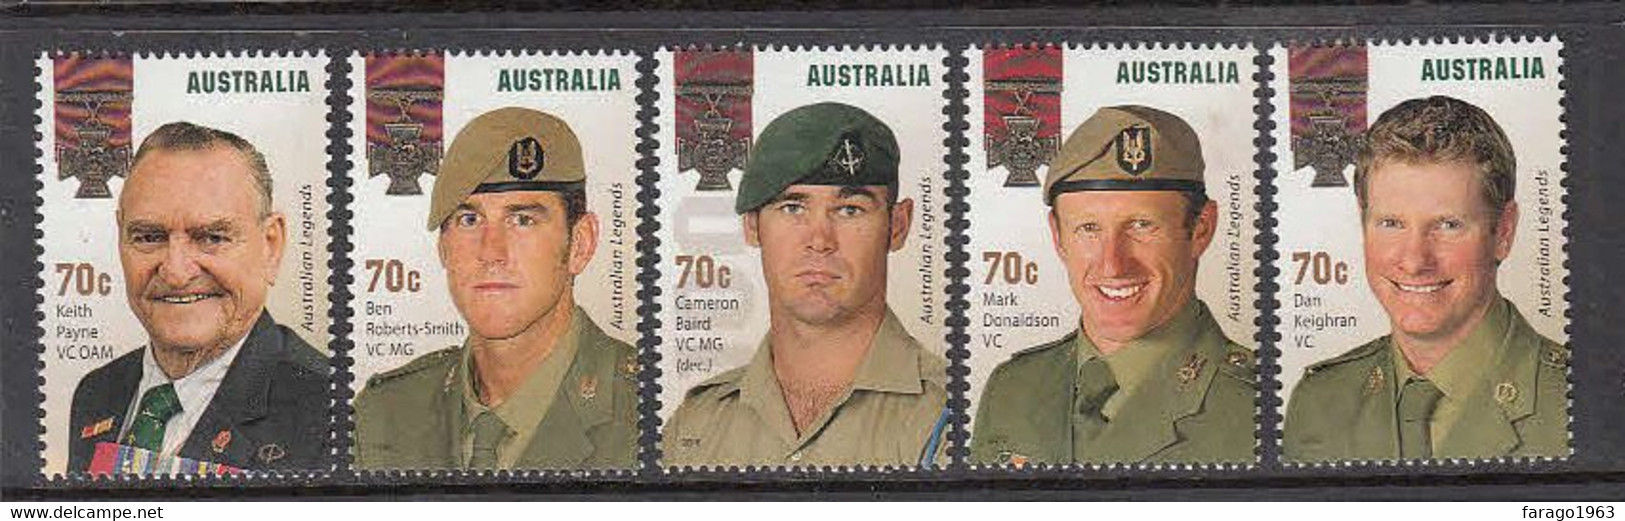 2015 Australia Victoria Cross Recipients Military Complete Set Of 5 MNH  @ BELOW FACE VALUE - Mint Stamps